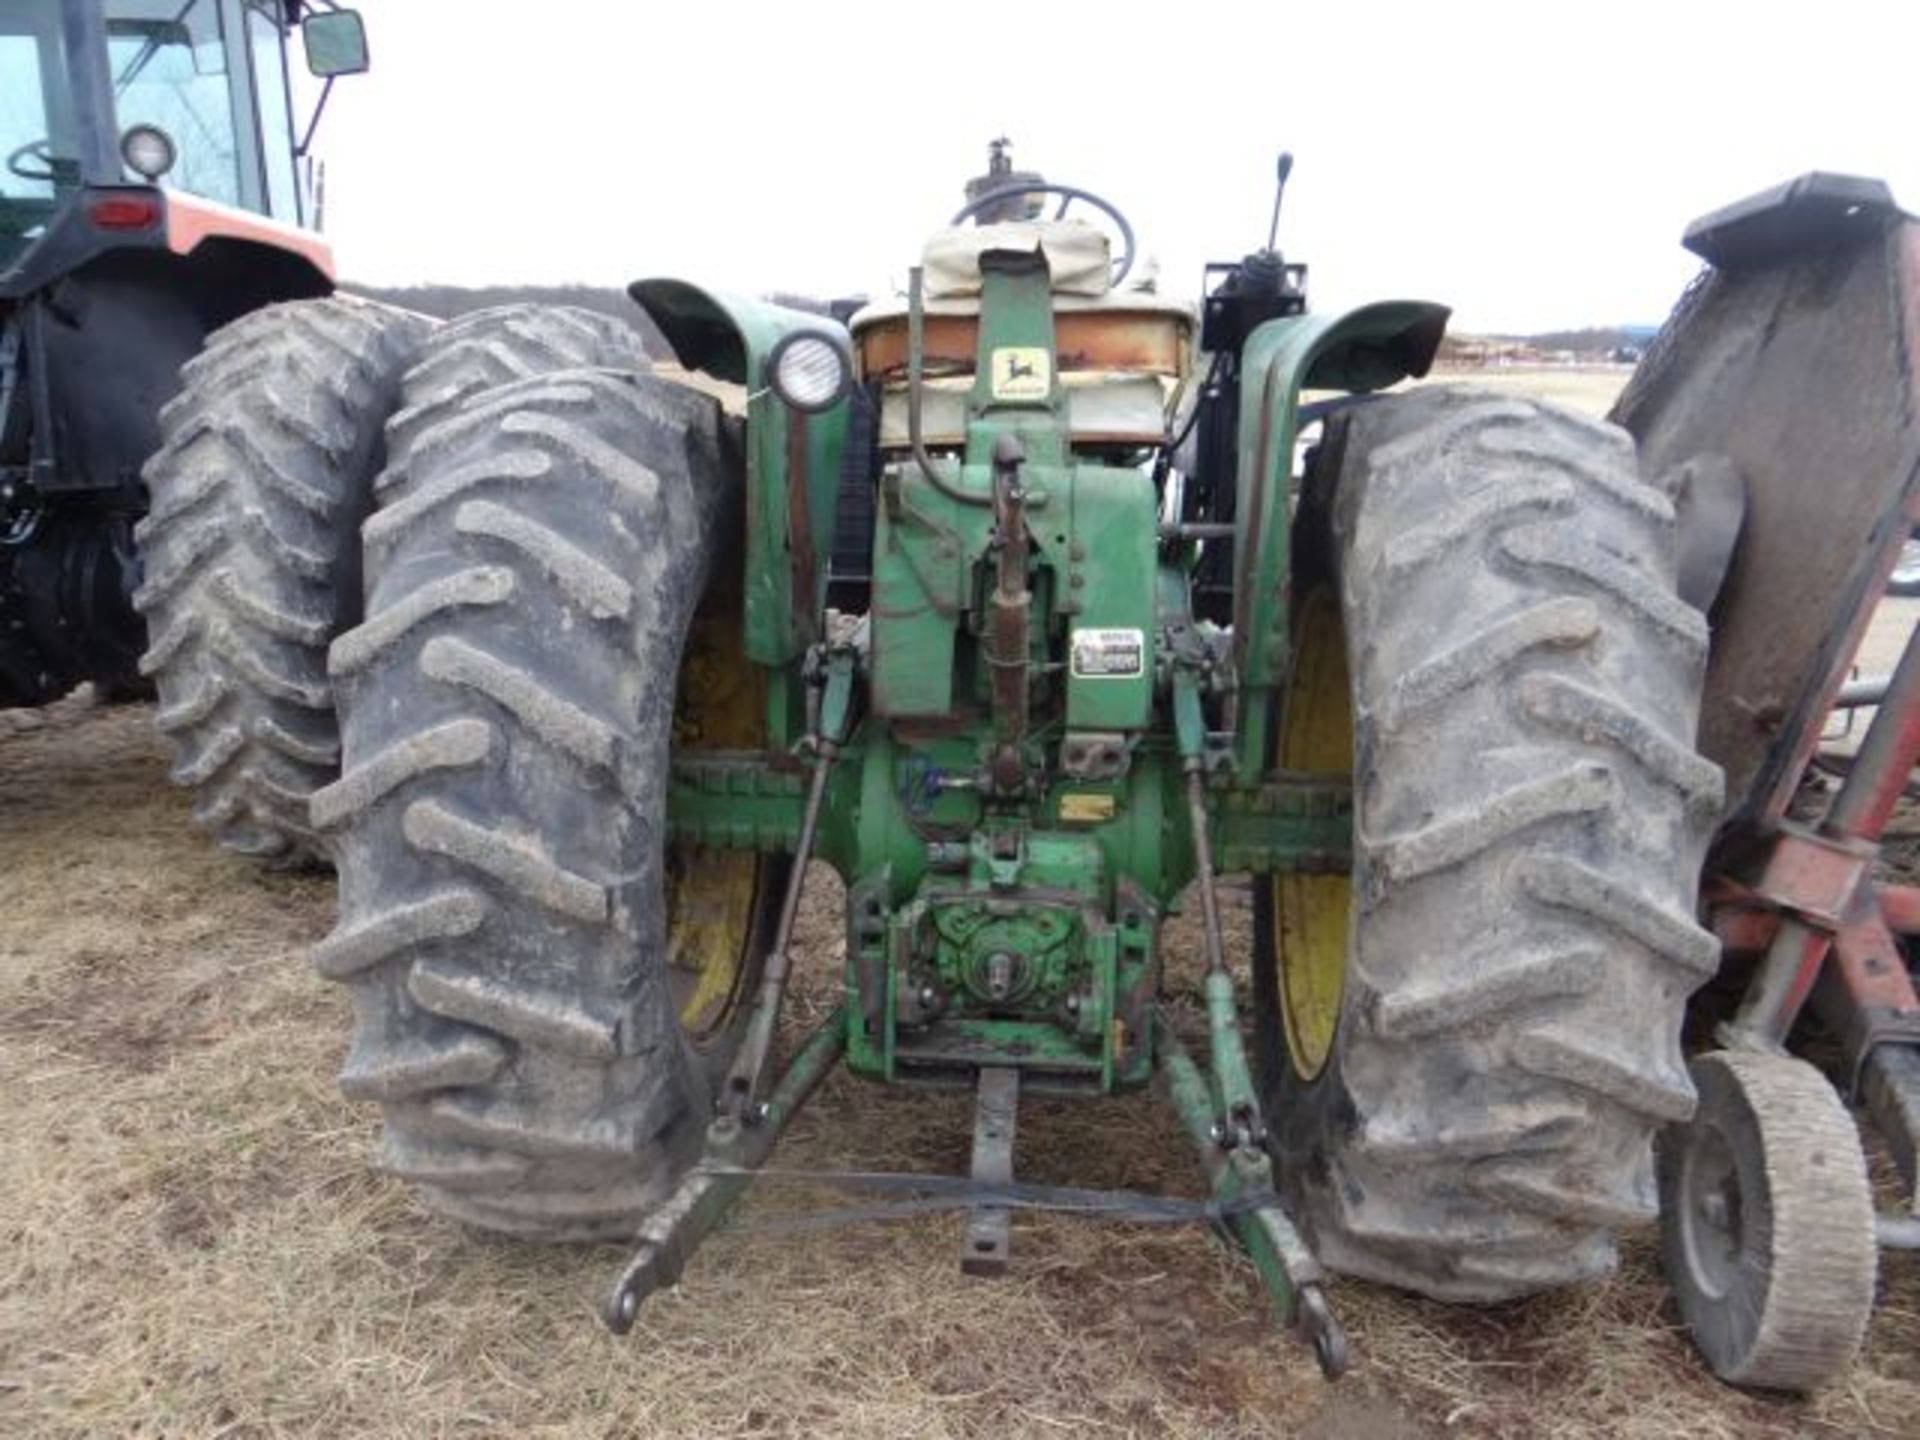 JD 4020 Tractor, 1967 Diesel, Powershift, Hrs are Correct, Trans Overhauled, 300 hrs ago, w/ Bush - Image 2 of 5